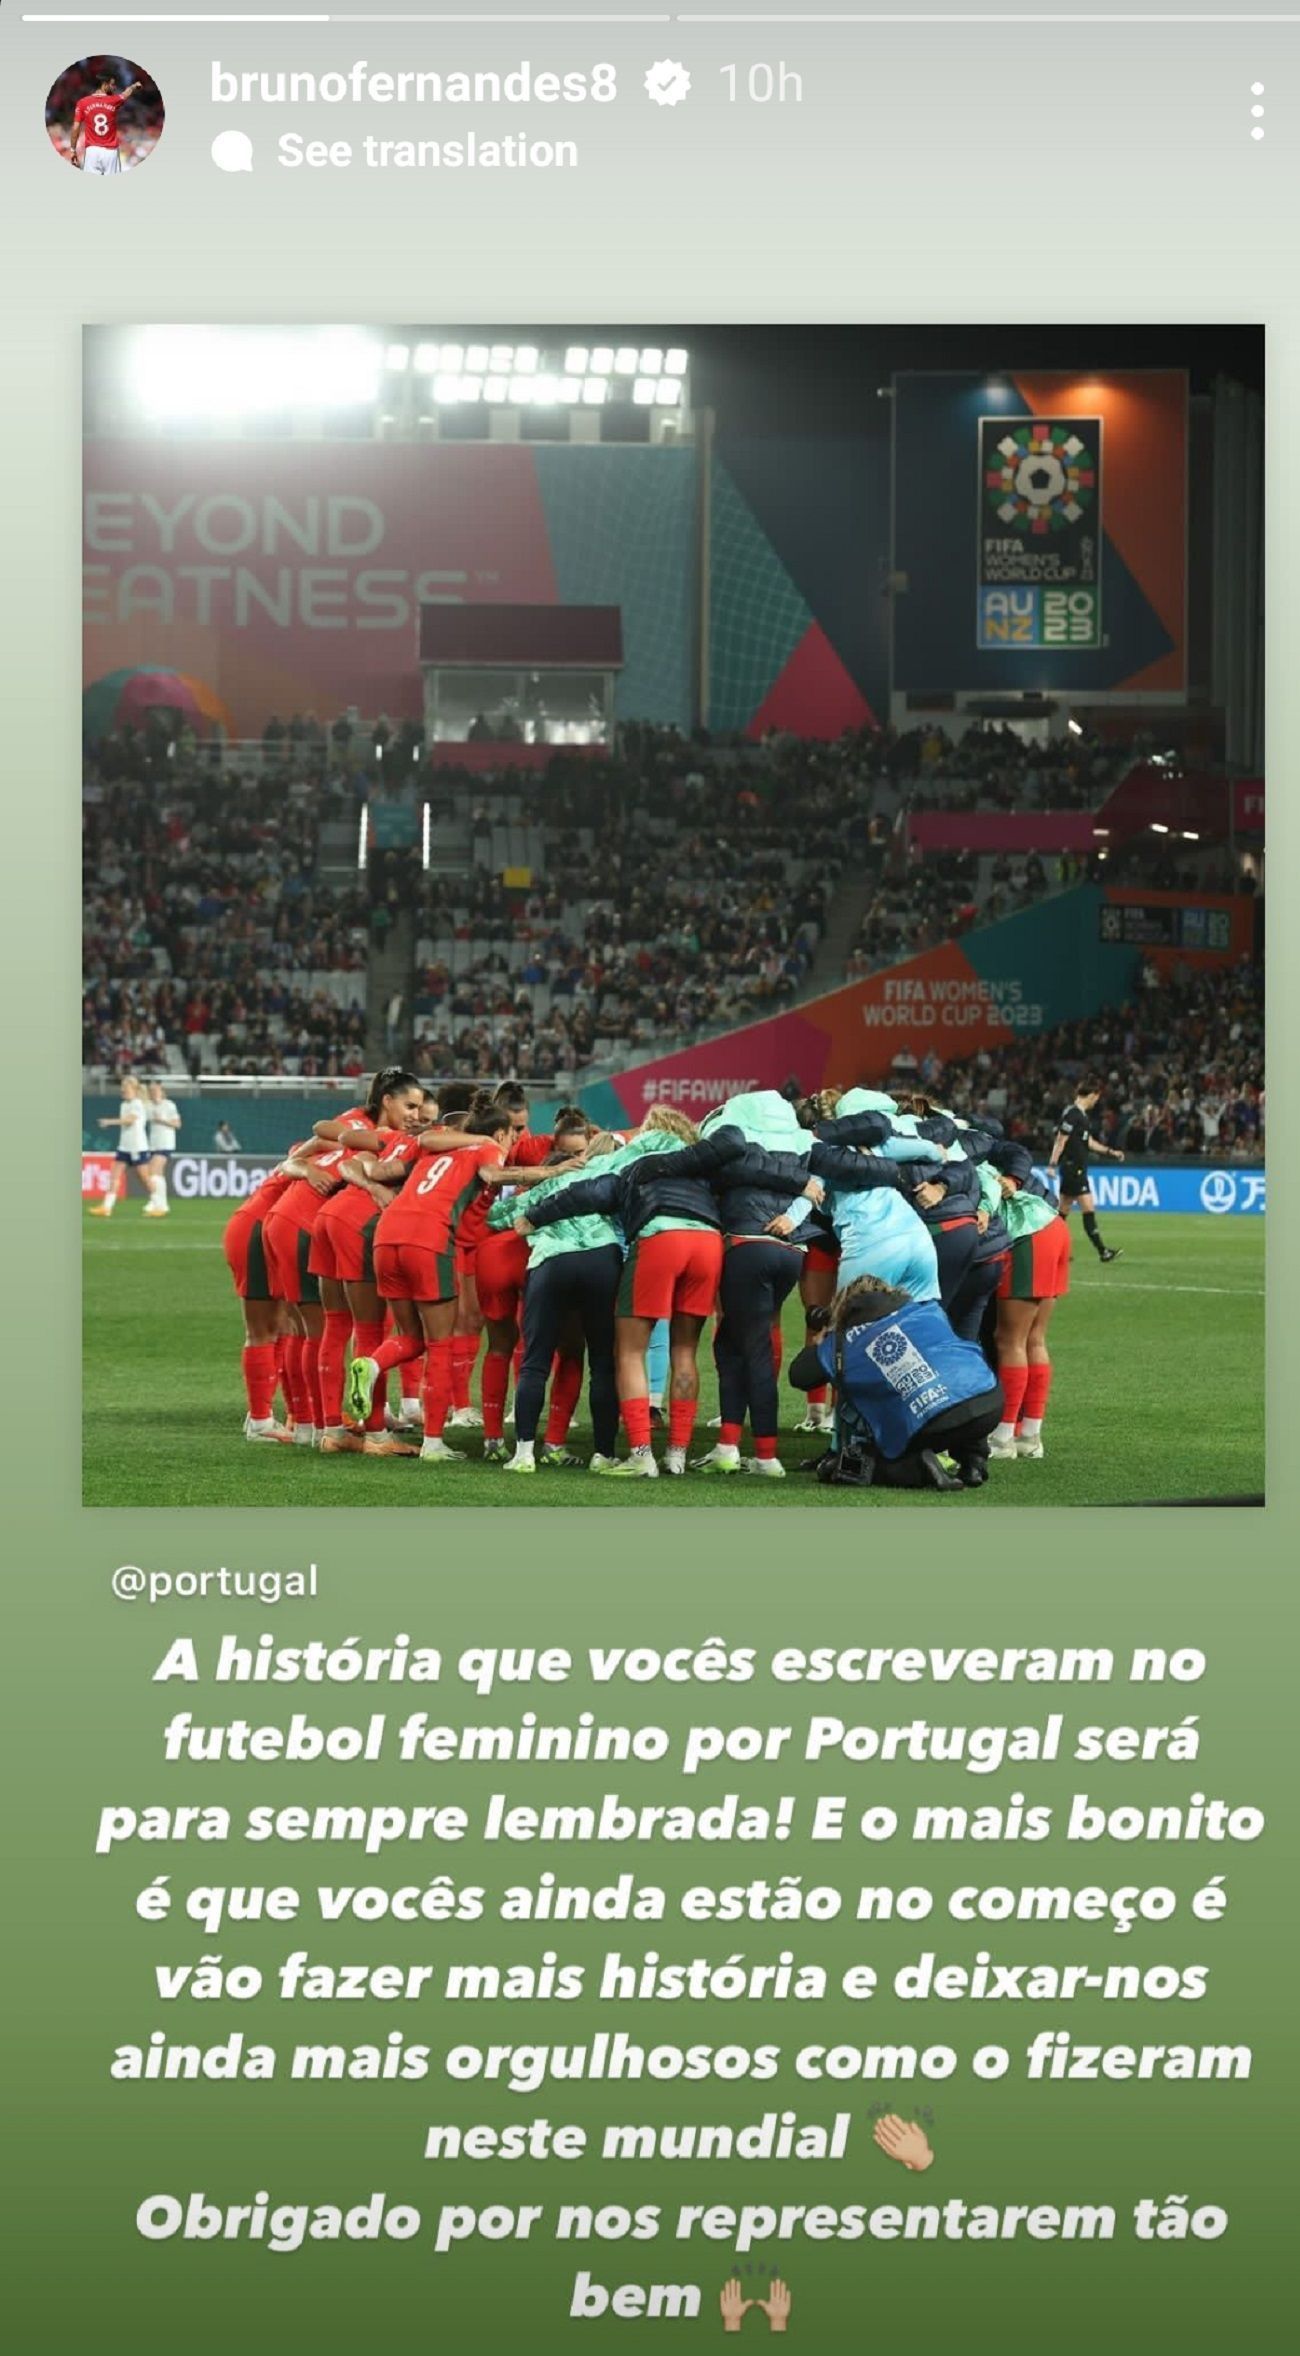 Bruno Fernandes reaches out to Portugal team.